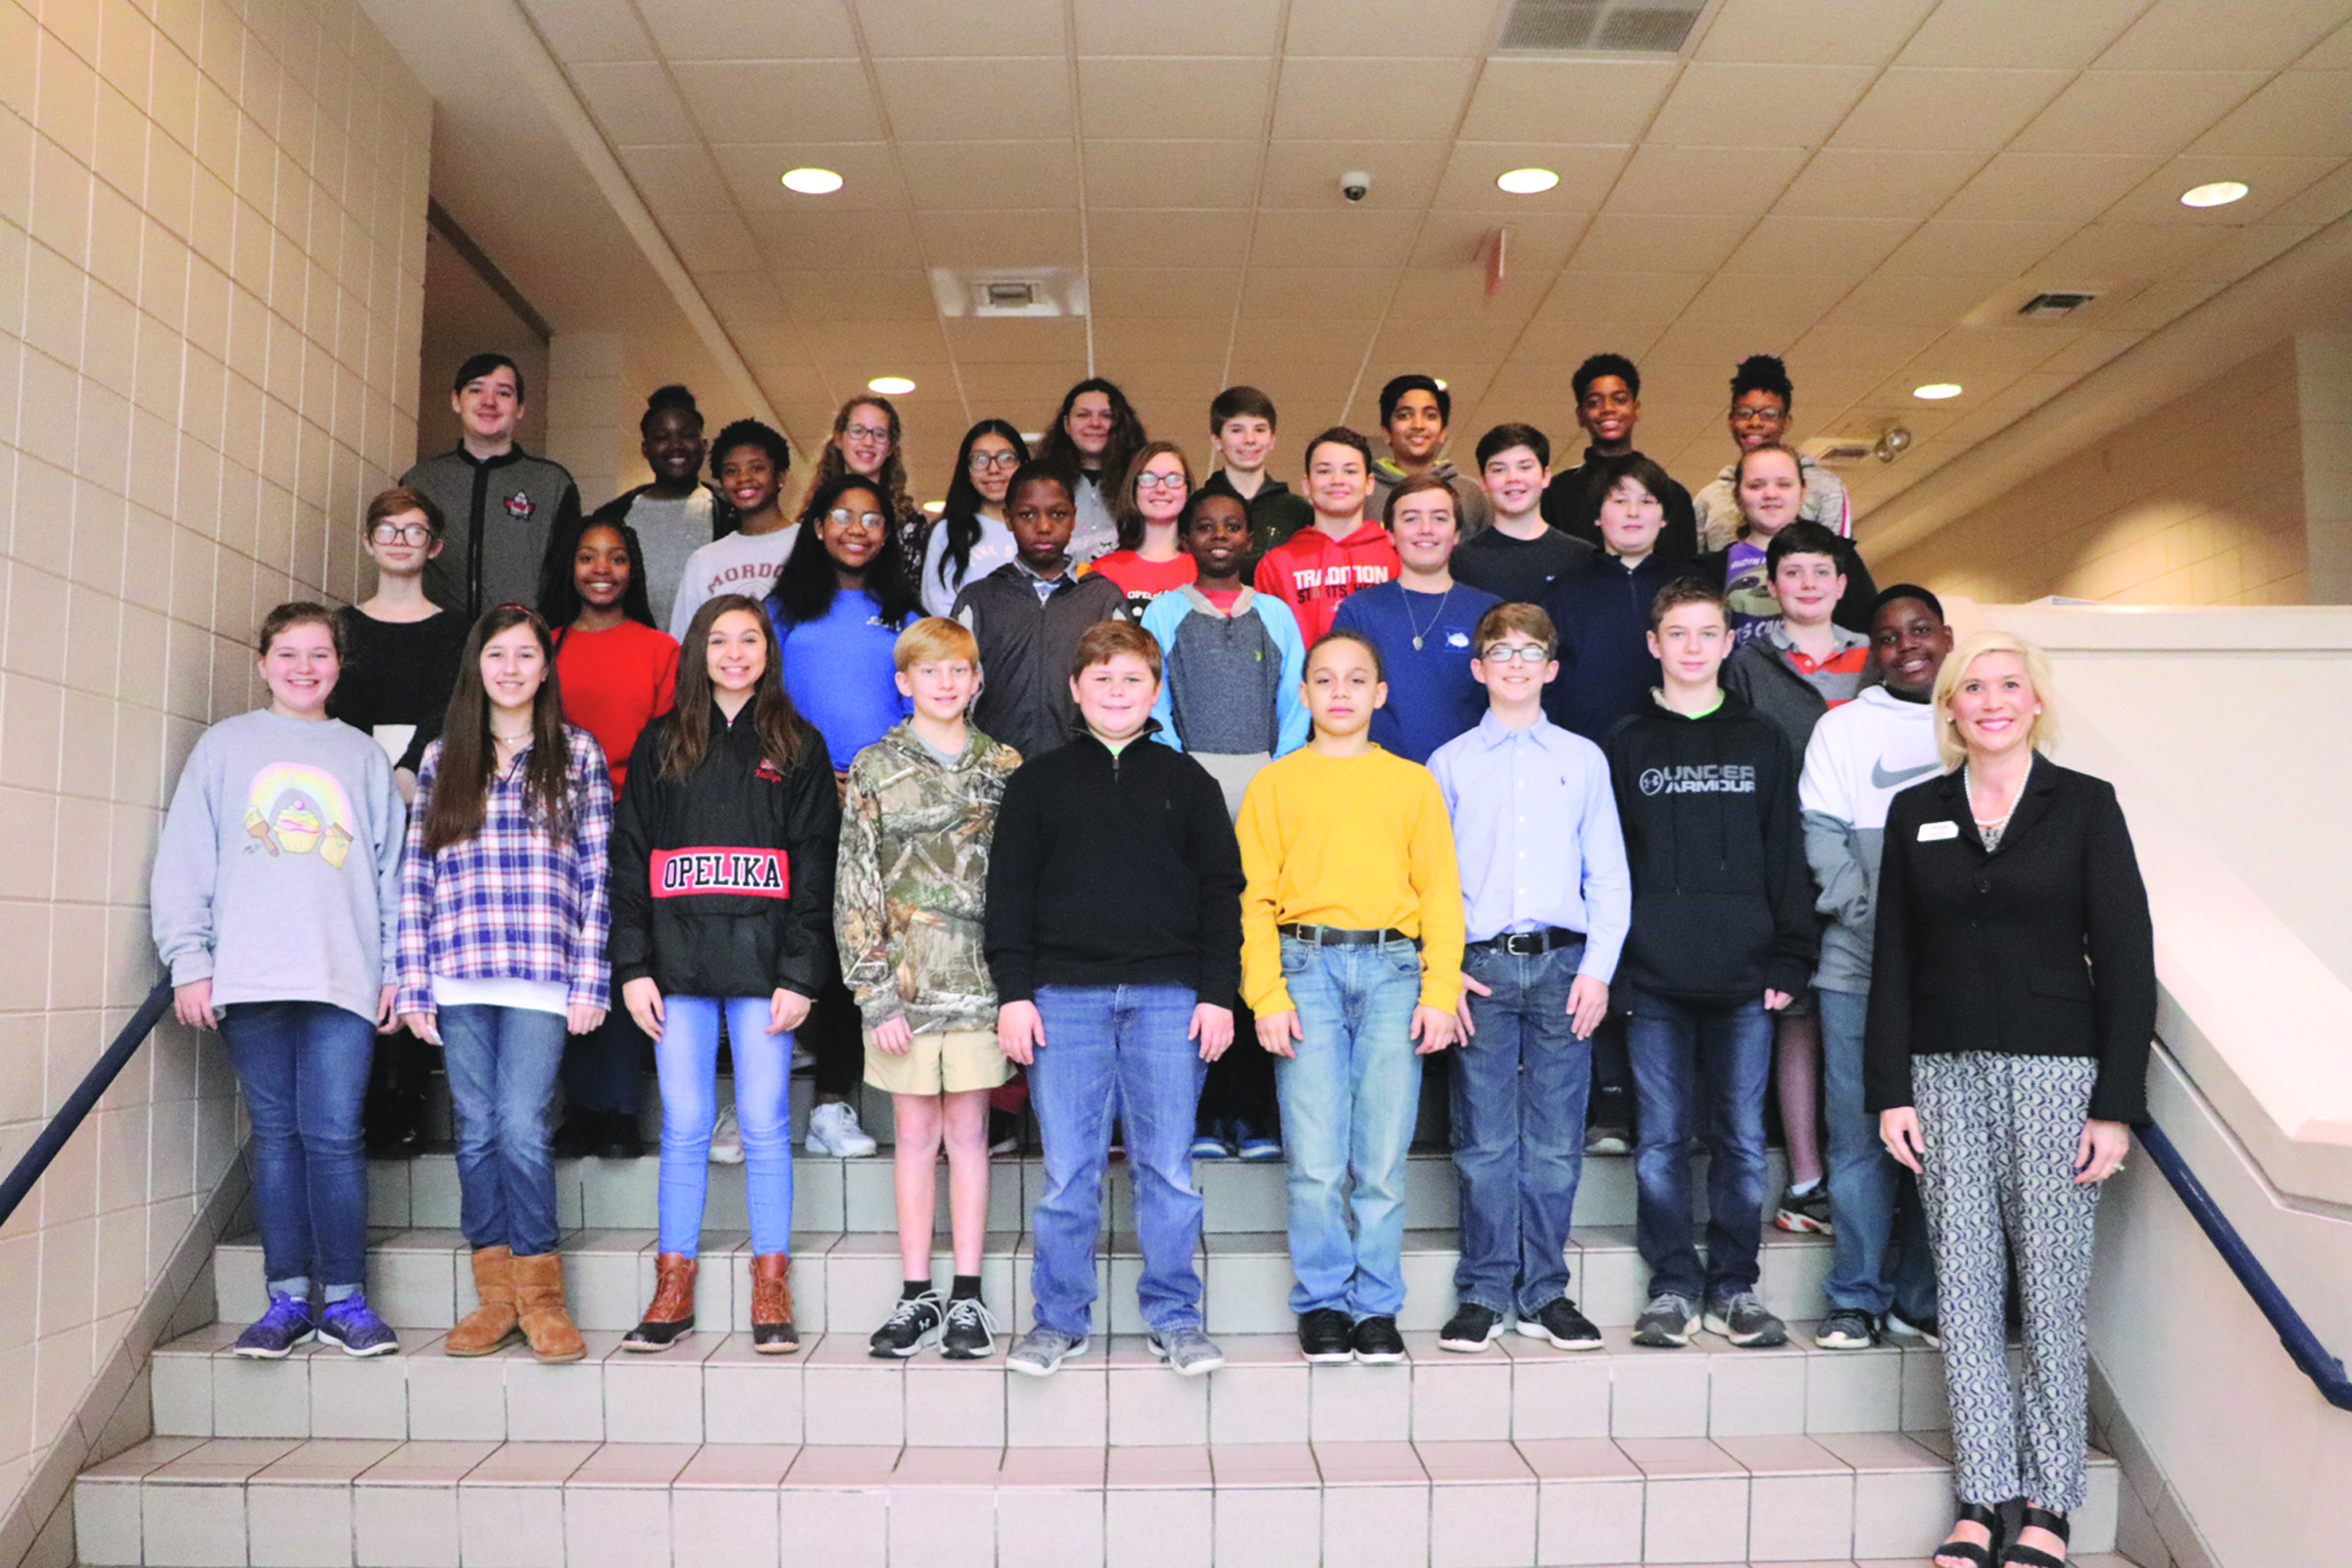 2018-19 Duke Tip Scholars from Opelika Middle School recognized last month